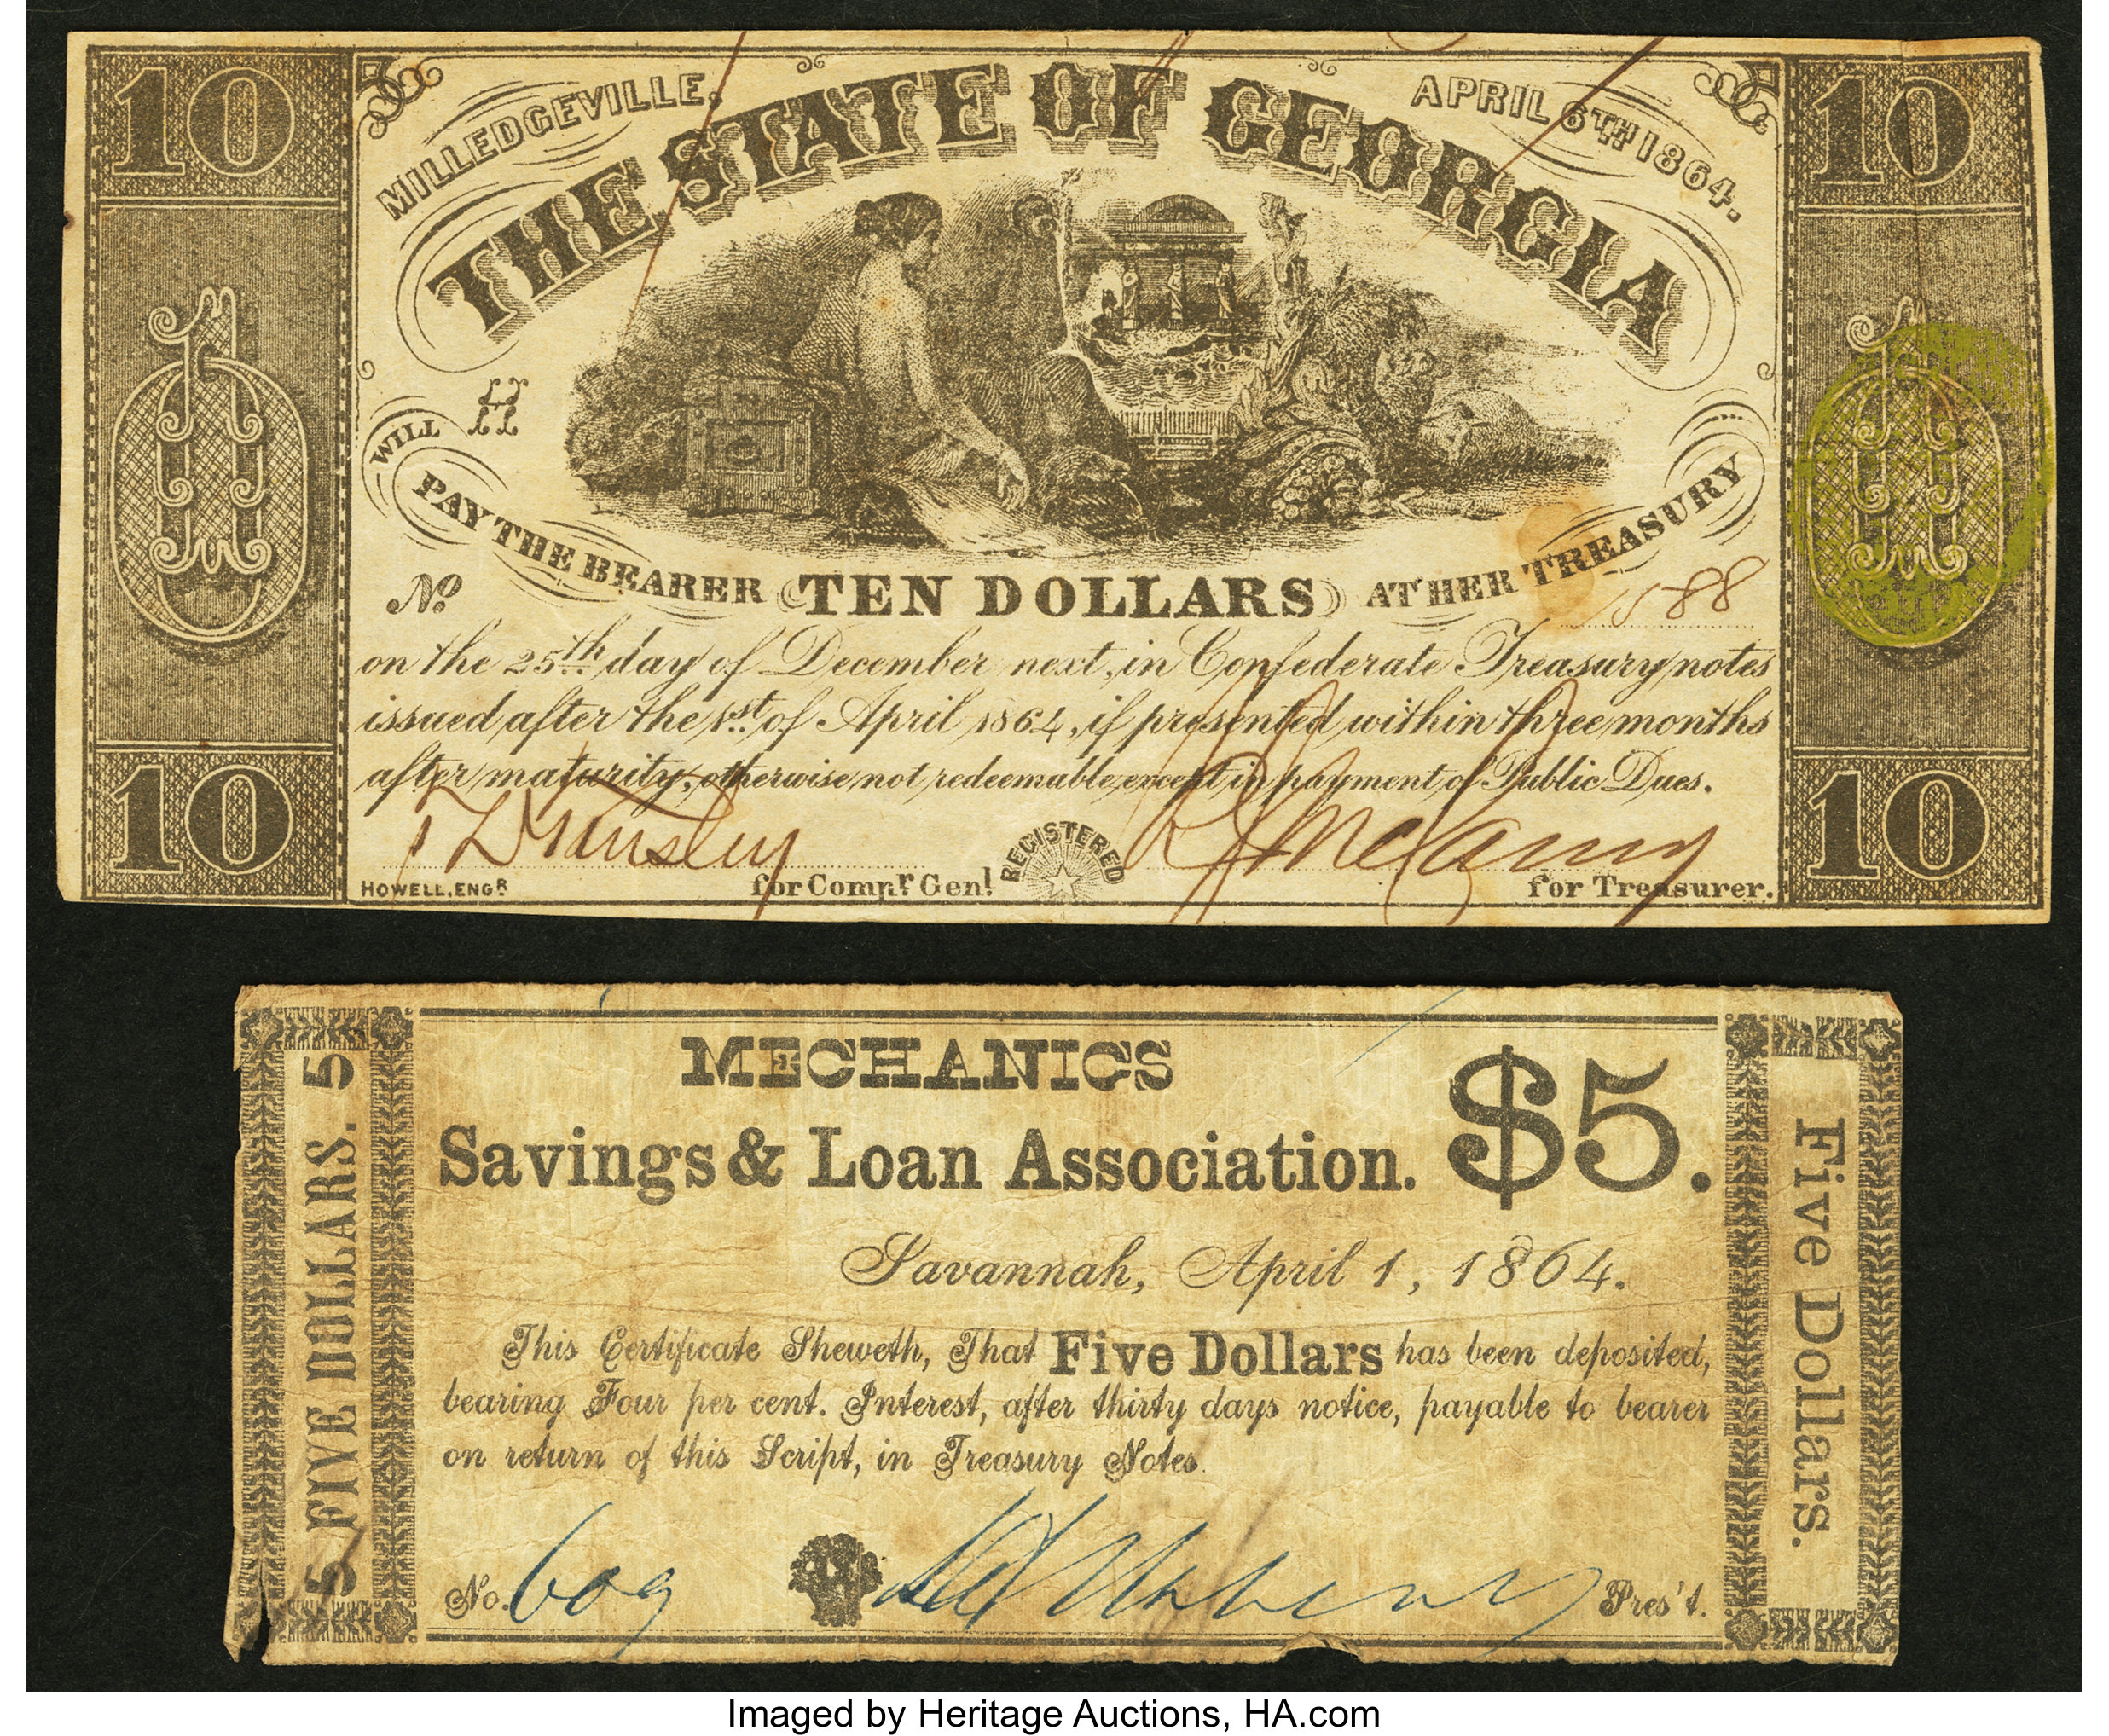 Sold at Auction: 1864 State of Georgia Five Dollar Bill